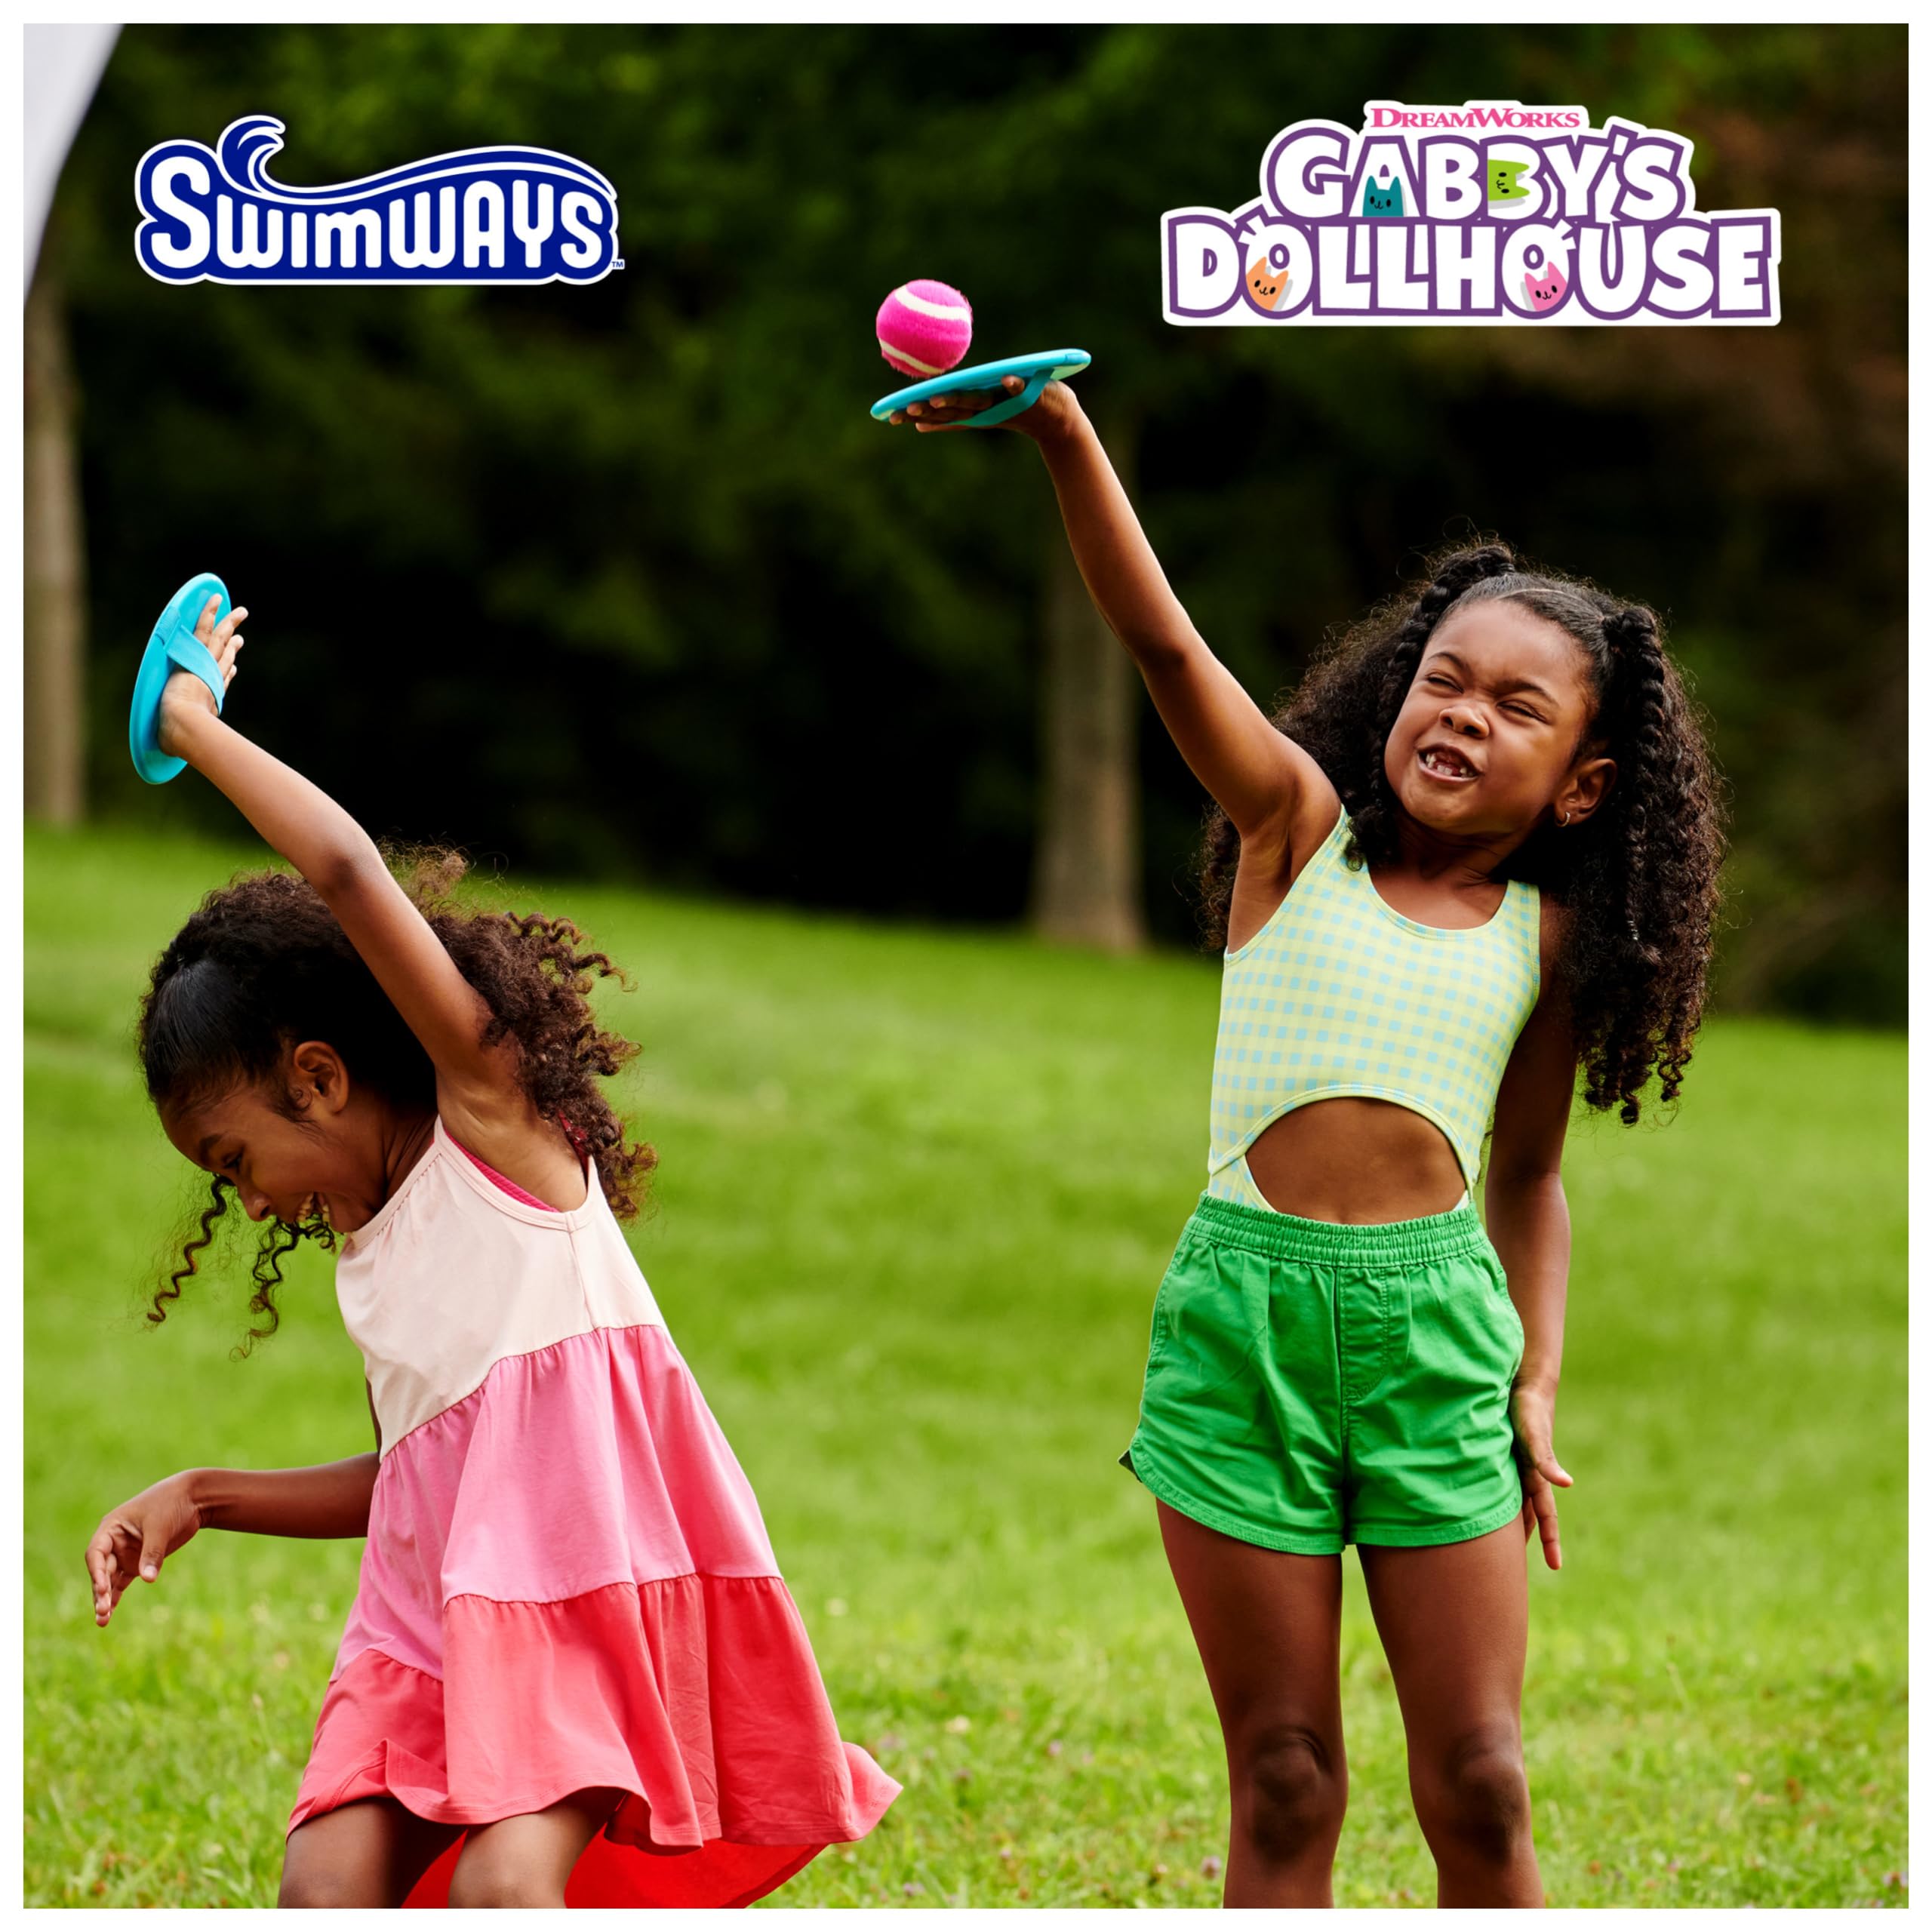 Swimways Gabby's Dollhouse Catch Game, Swimming Pool Accessories & Kids Outdoor Toys, Gabby's Dollhouse Party Supplies & Yard Games for Kids Aged 4 & Up